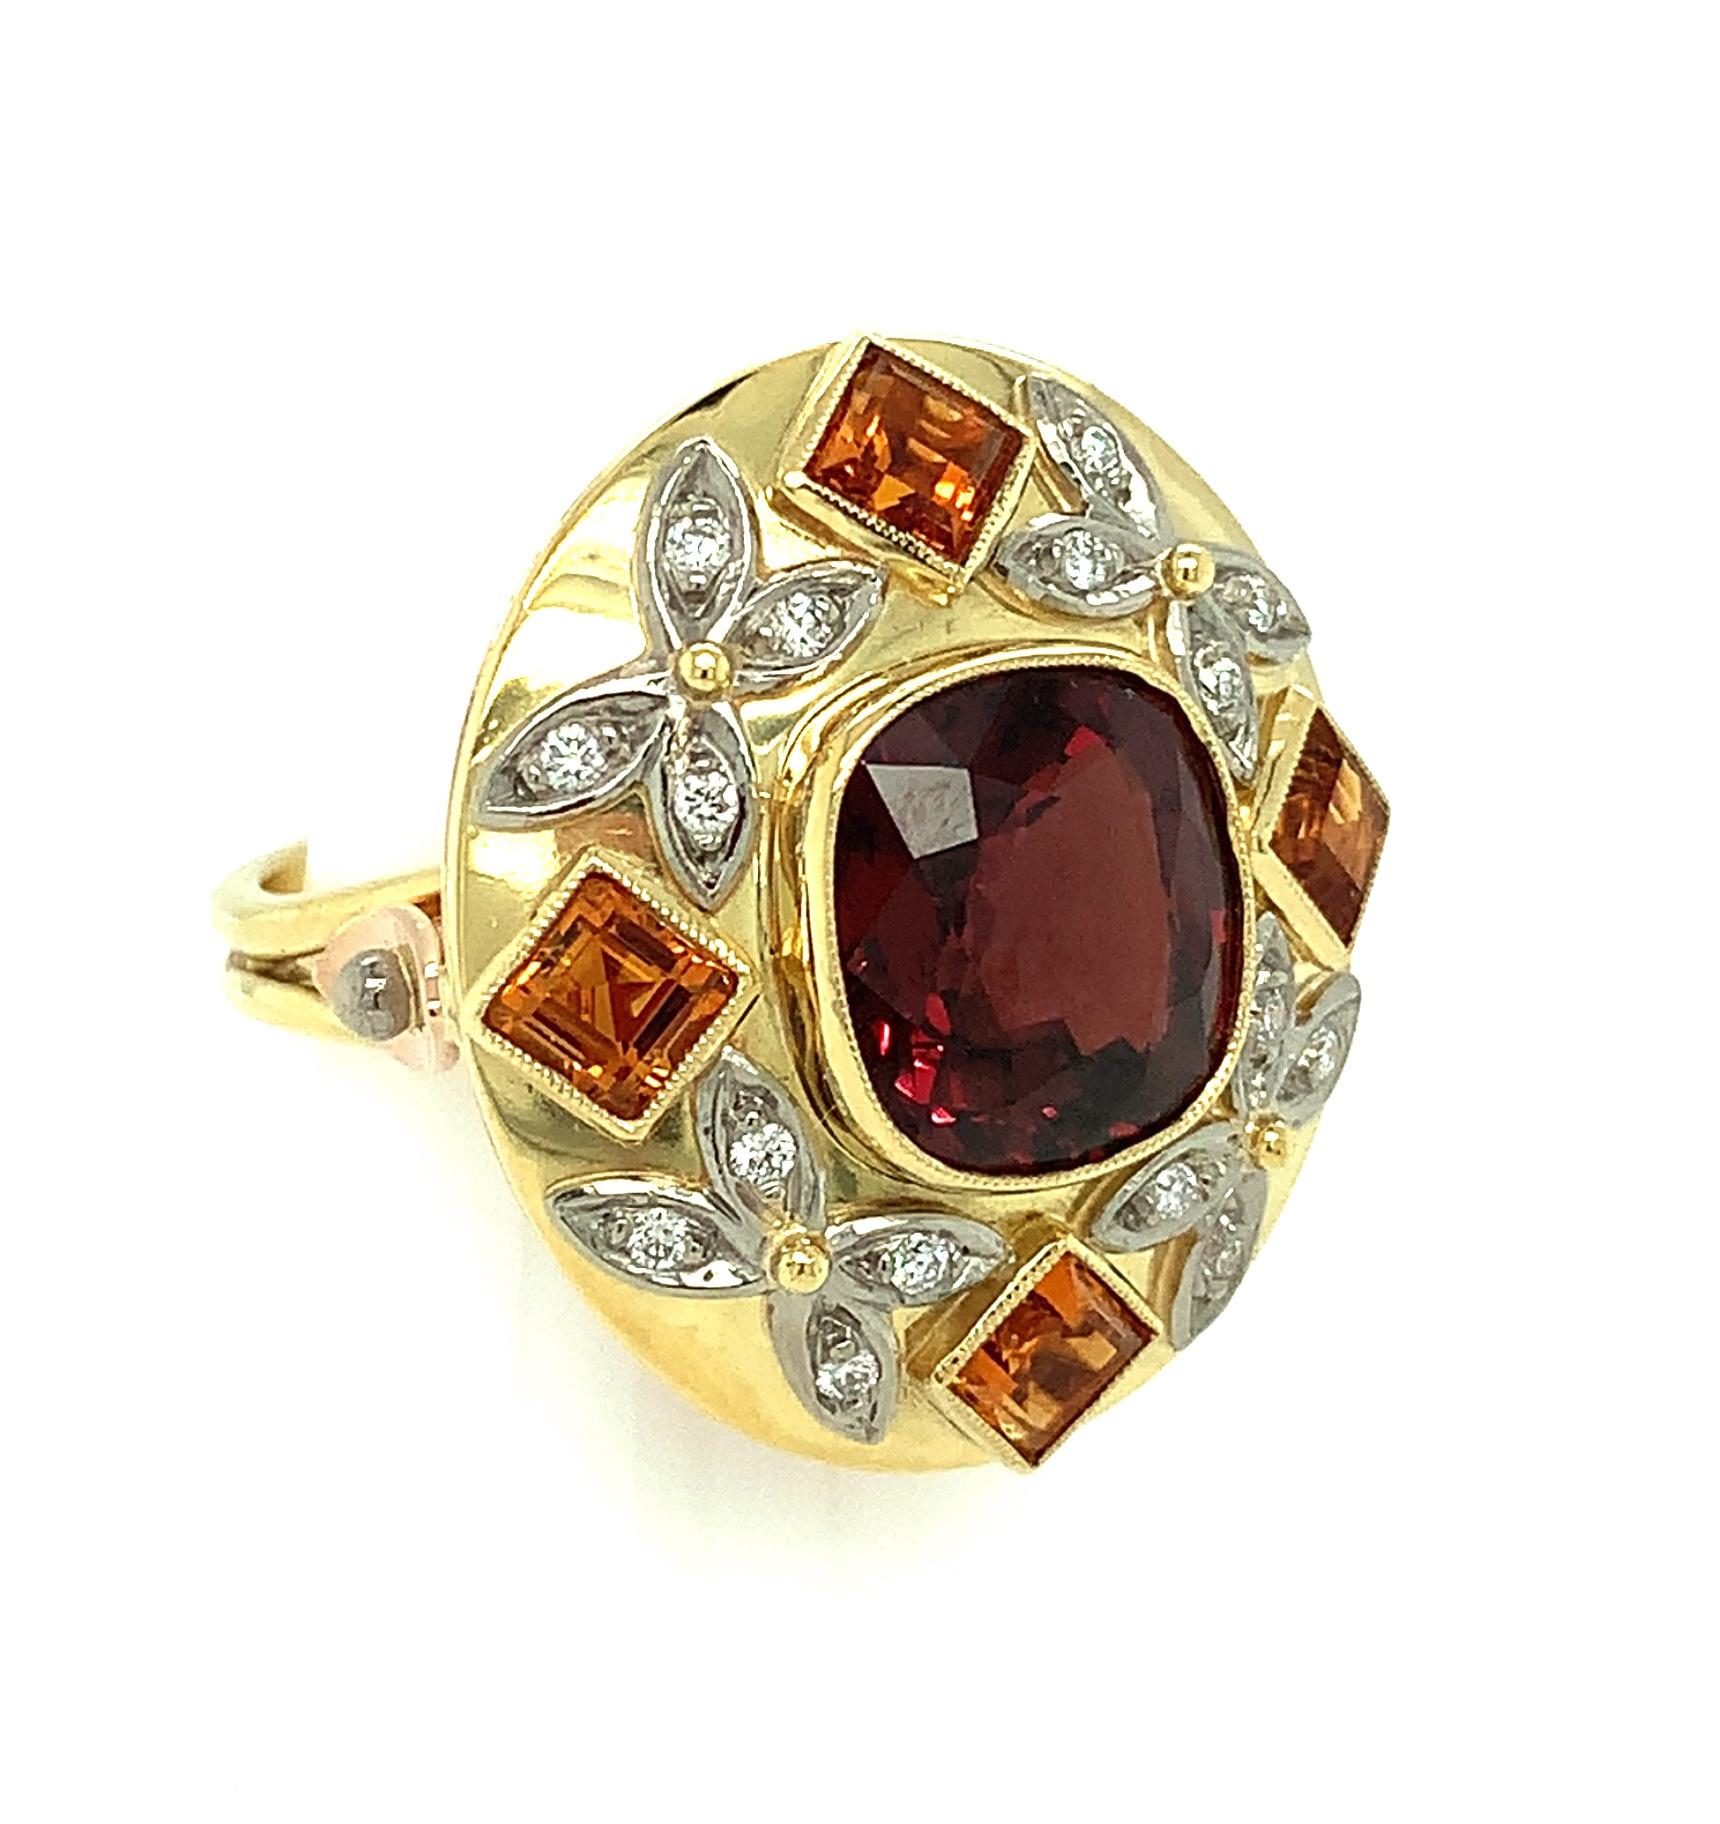 Cushion Cut 5.23 Carat Red Spinel, Citrine and Diamond Cocktail Ring in Tri-colored Gold For Sale